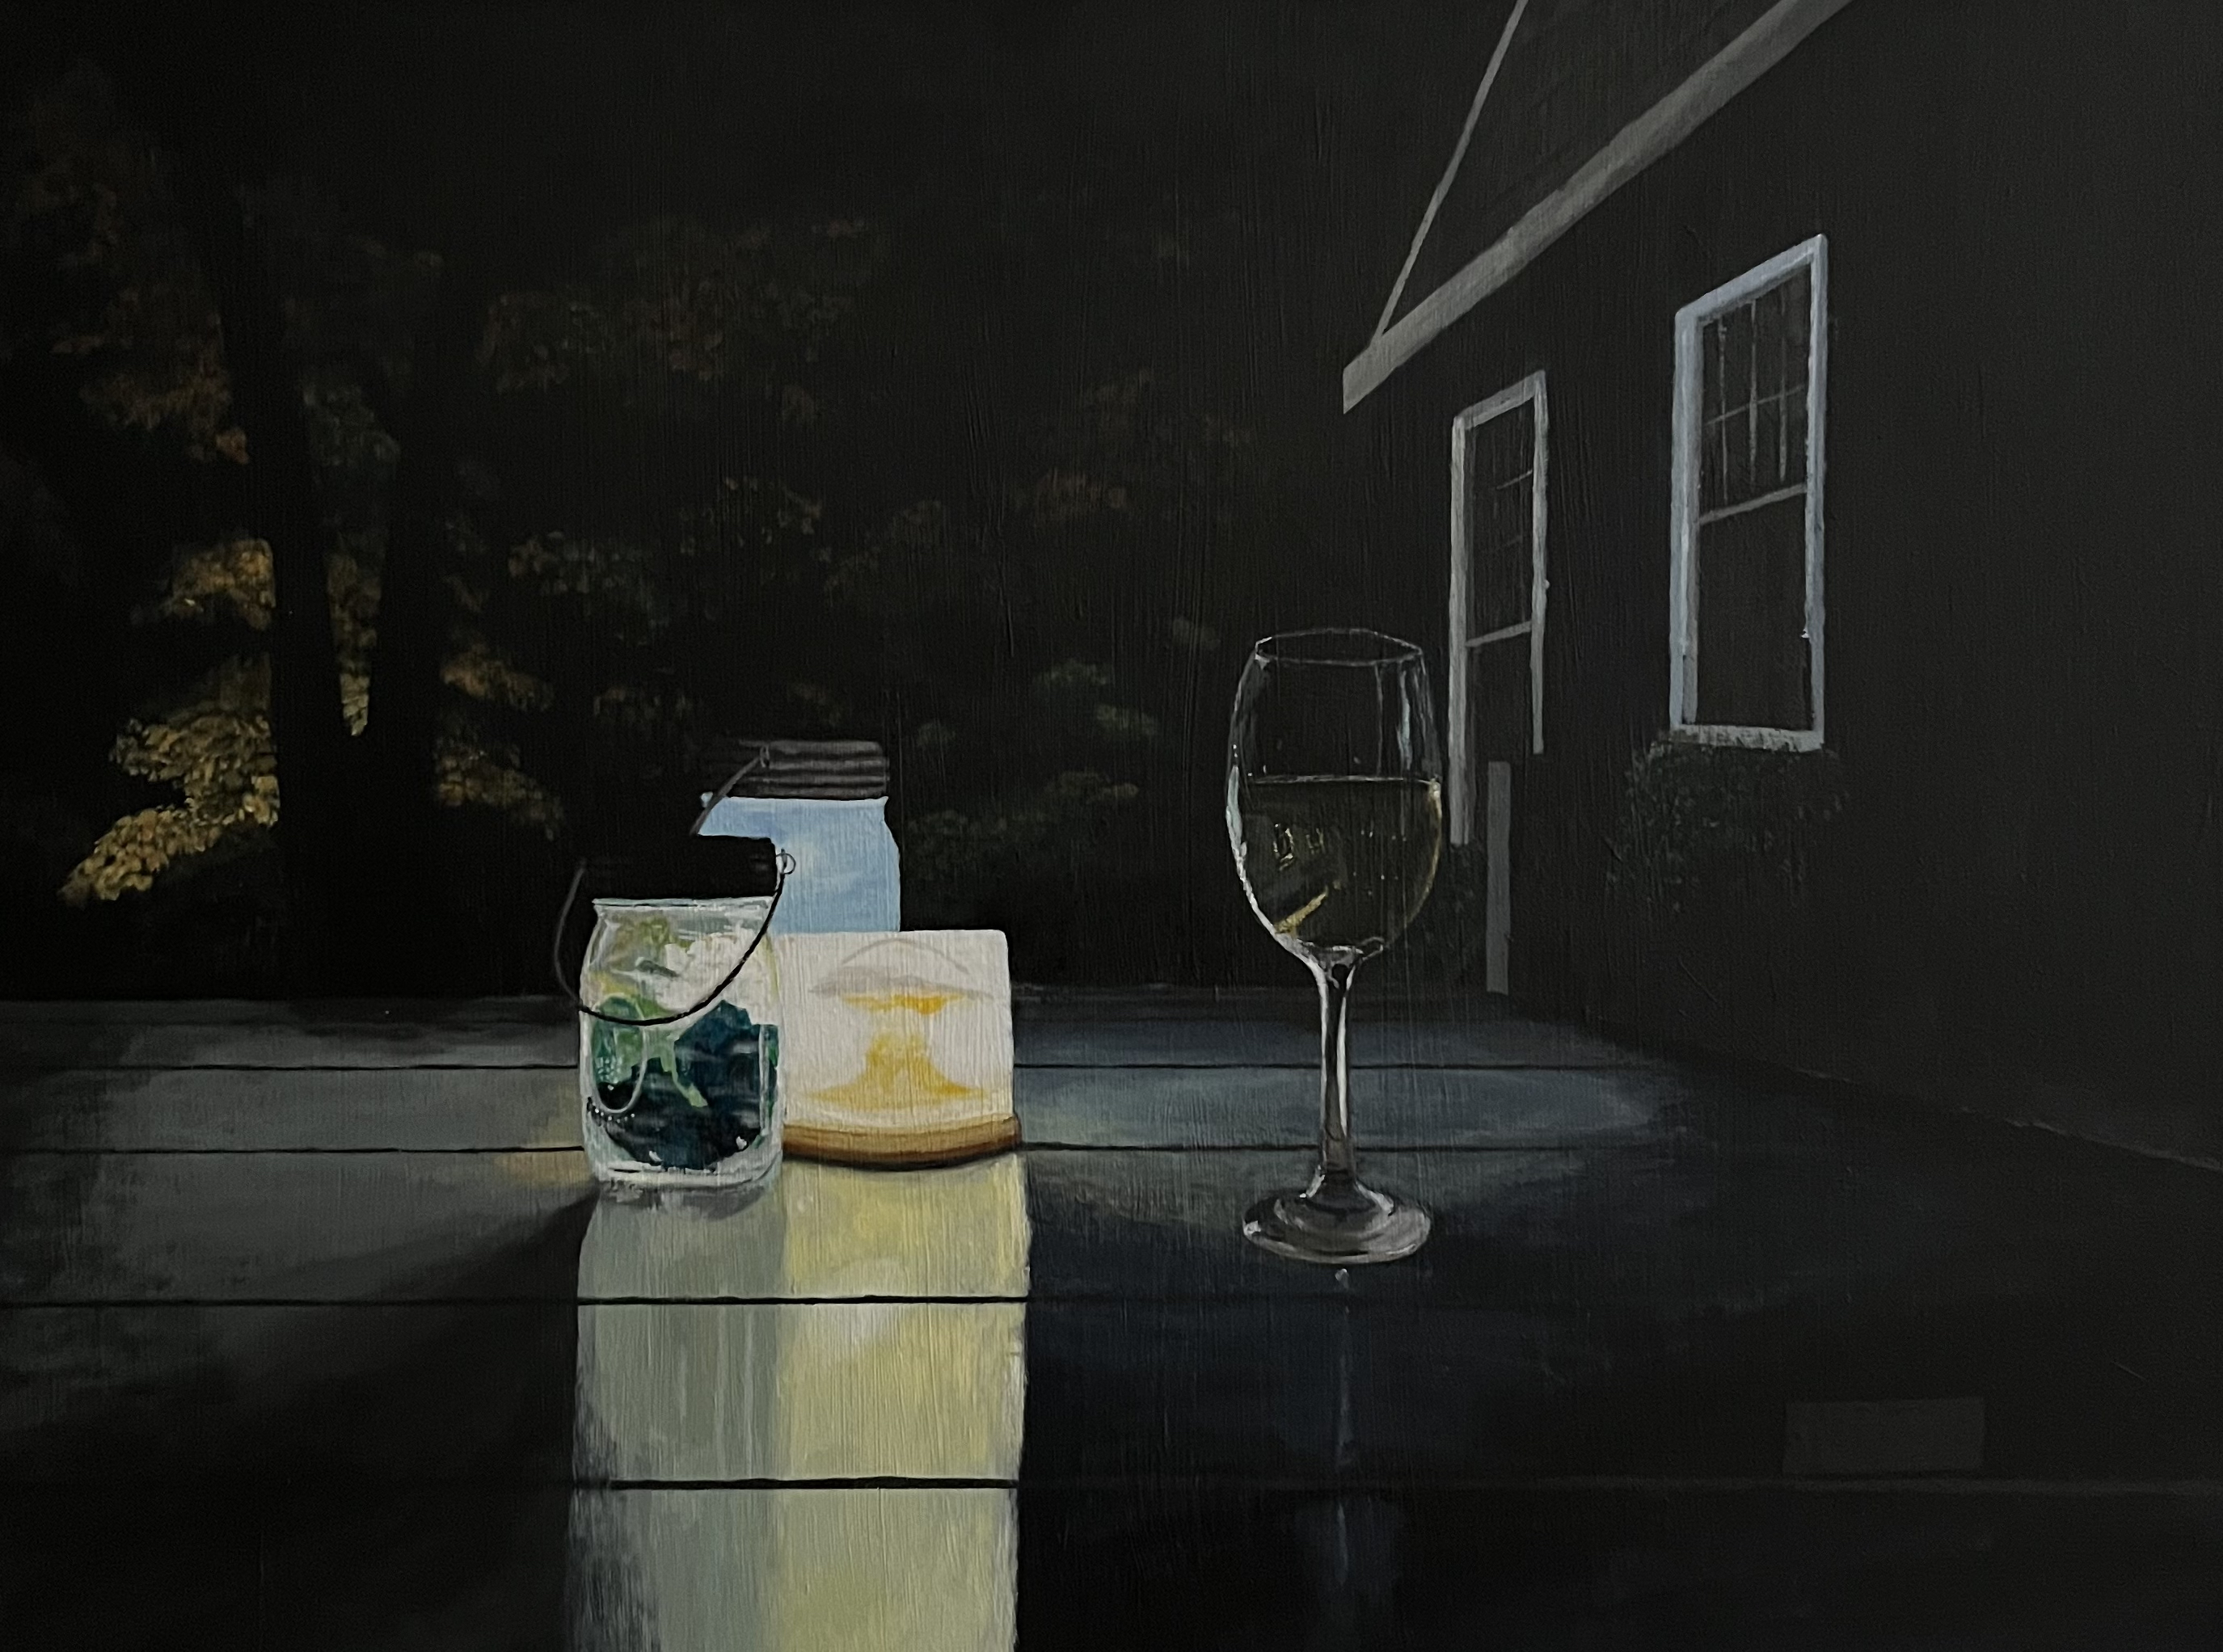 Table outside a house and trees on a dark night with a glass of wine and a couple of jars illuminated by a candle